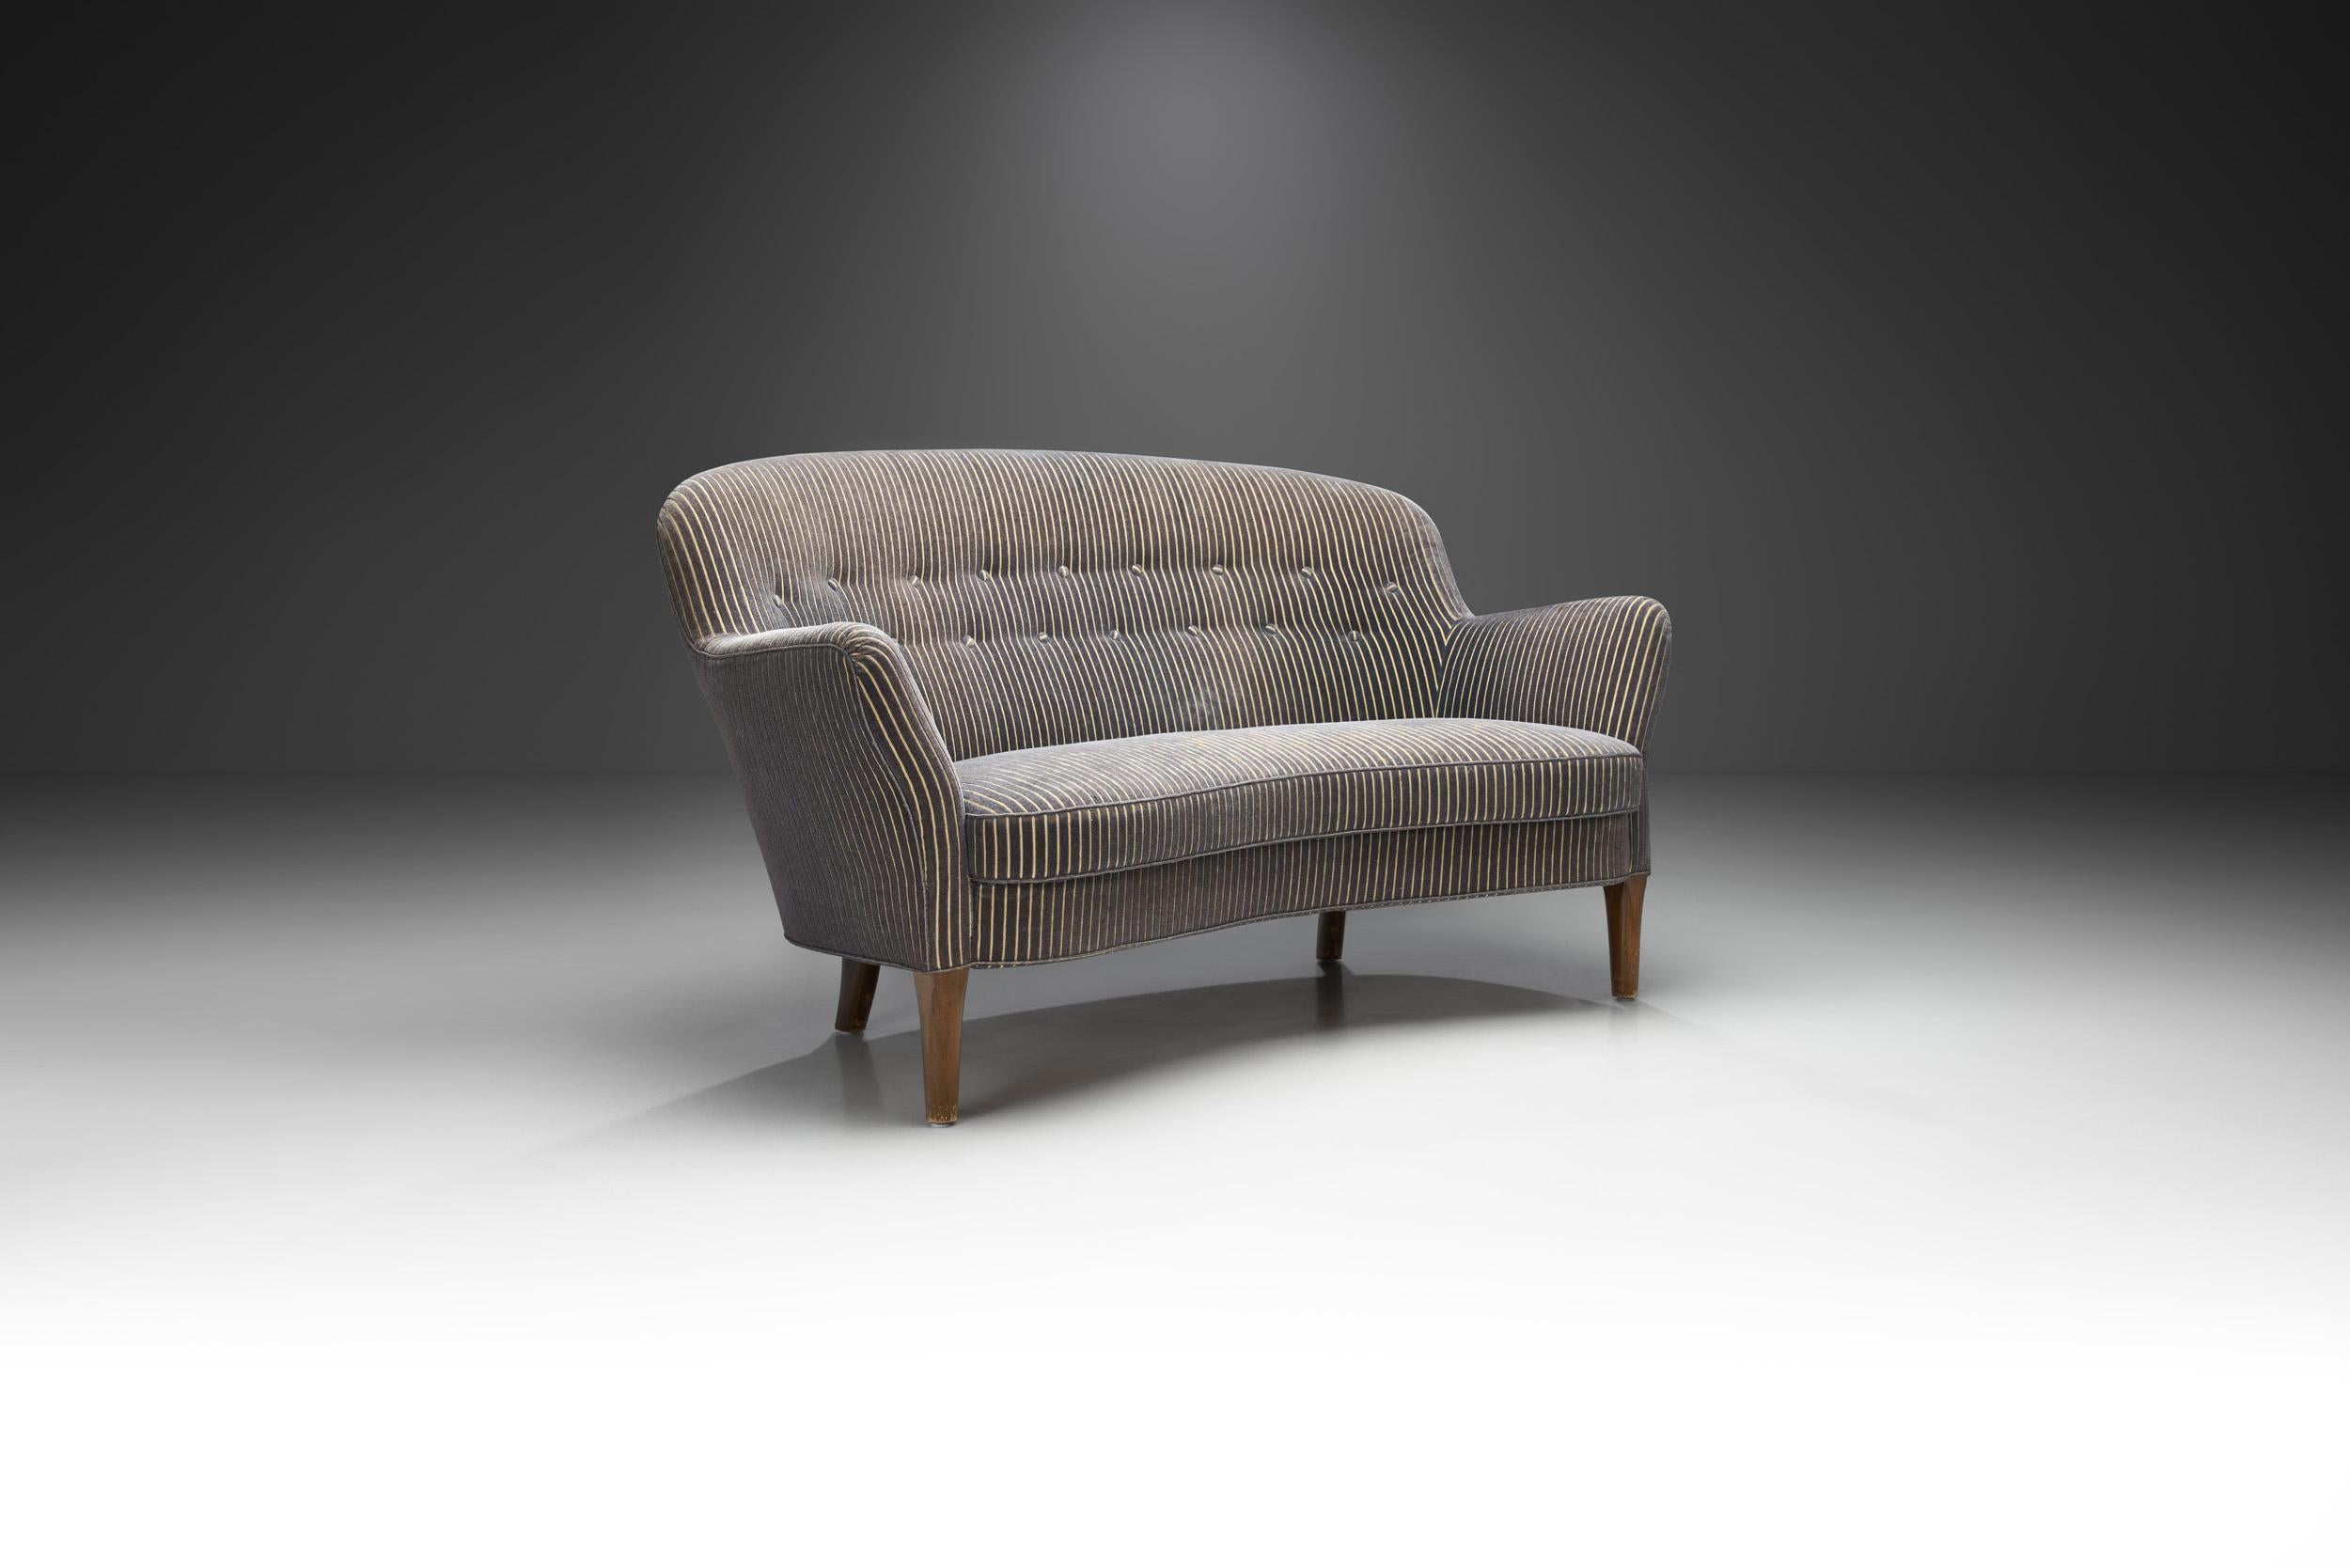 This beautiful Danish two-seater sofa is an early example of what became known as Danish Mid-Century Modern design. With a classic mid-century look, this model is the perfect piece to bring the coveted style into any interior. 

Modernism was an